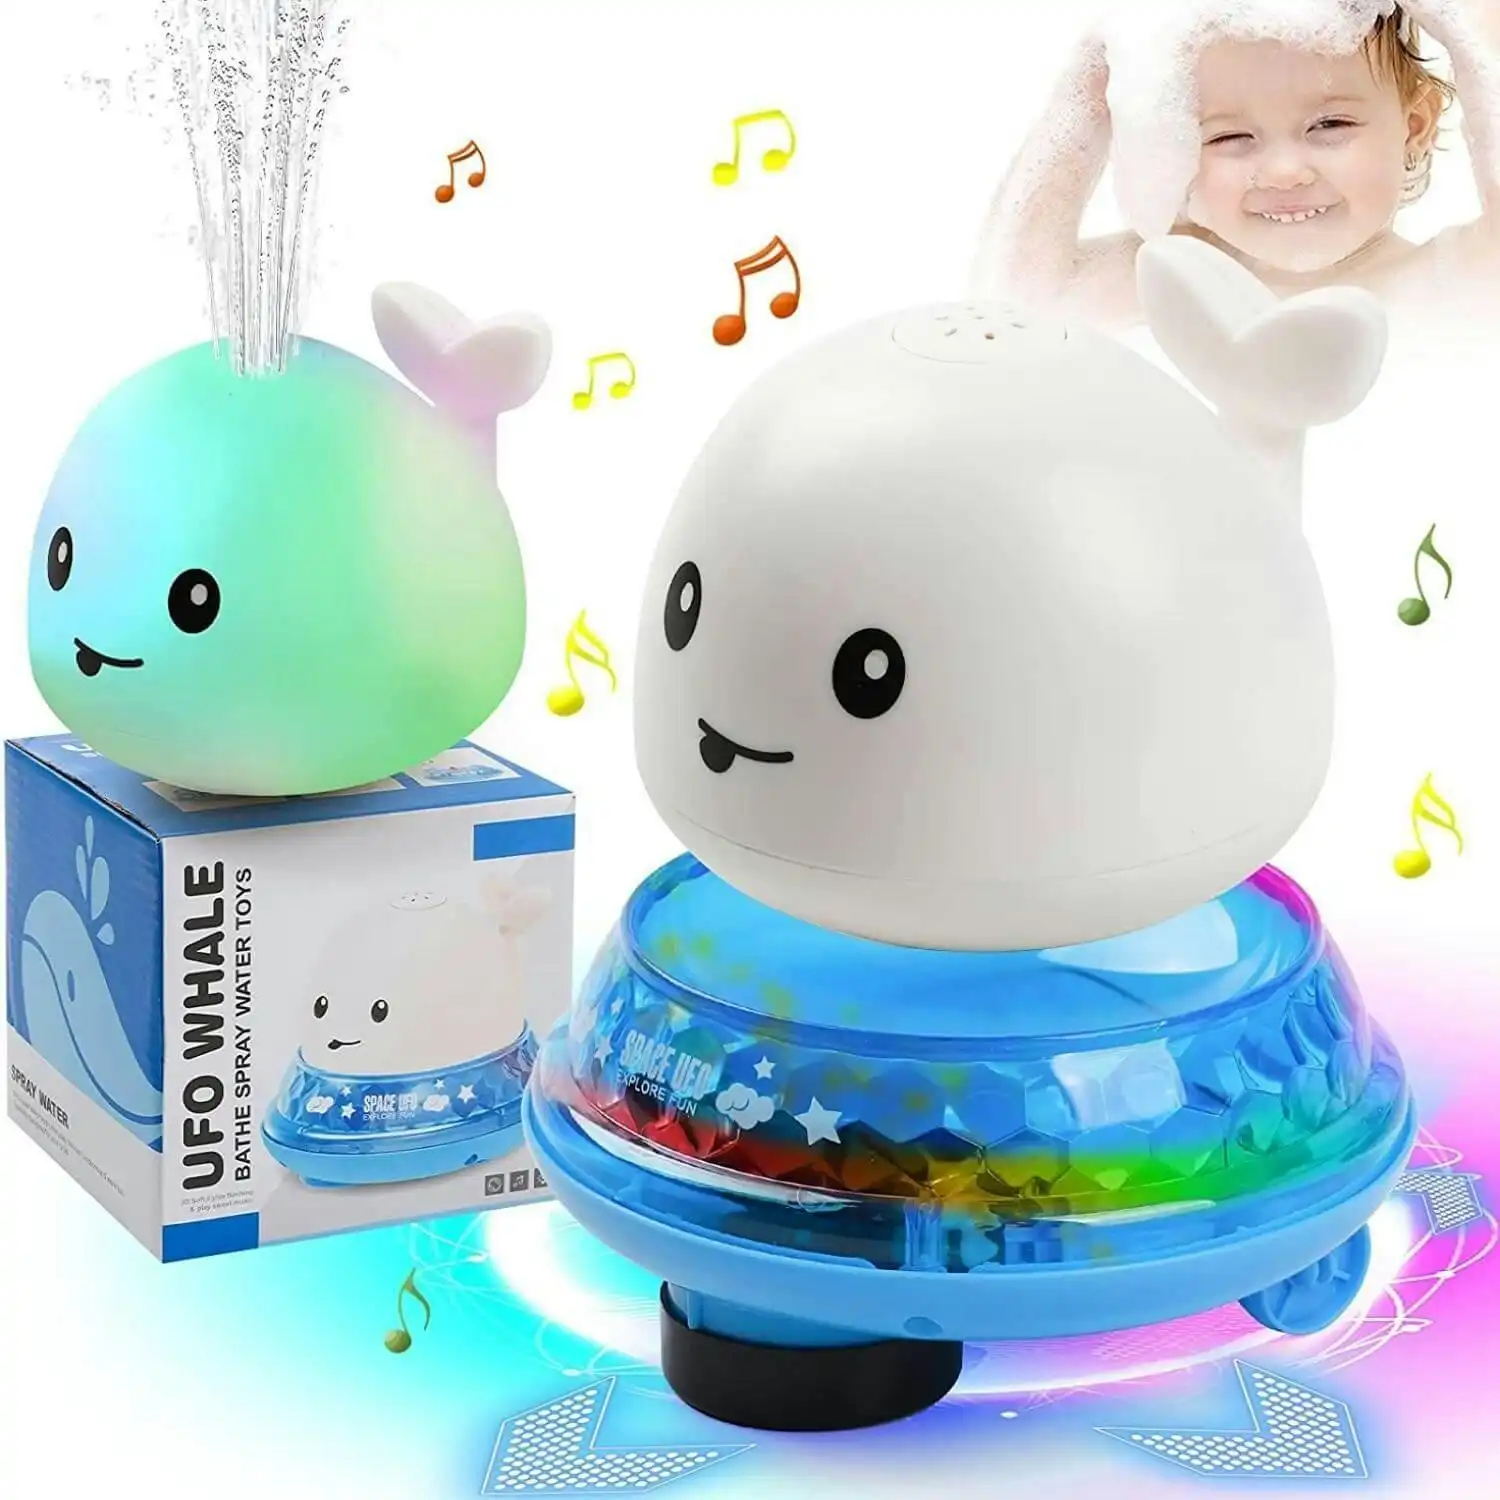 Kidst AquaLand Explorer 2-in-1 Toy Set Automatic Baby LED Waterproof Bath Toys